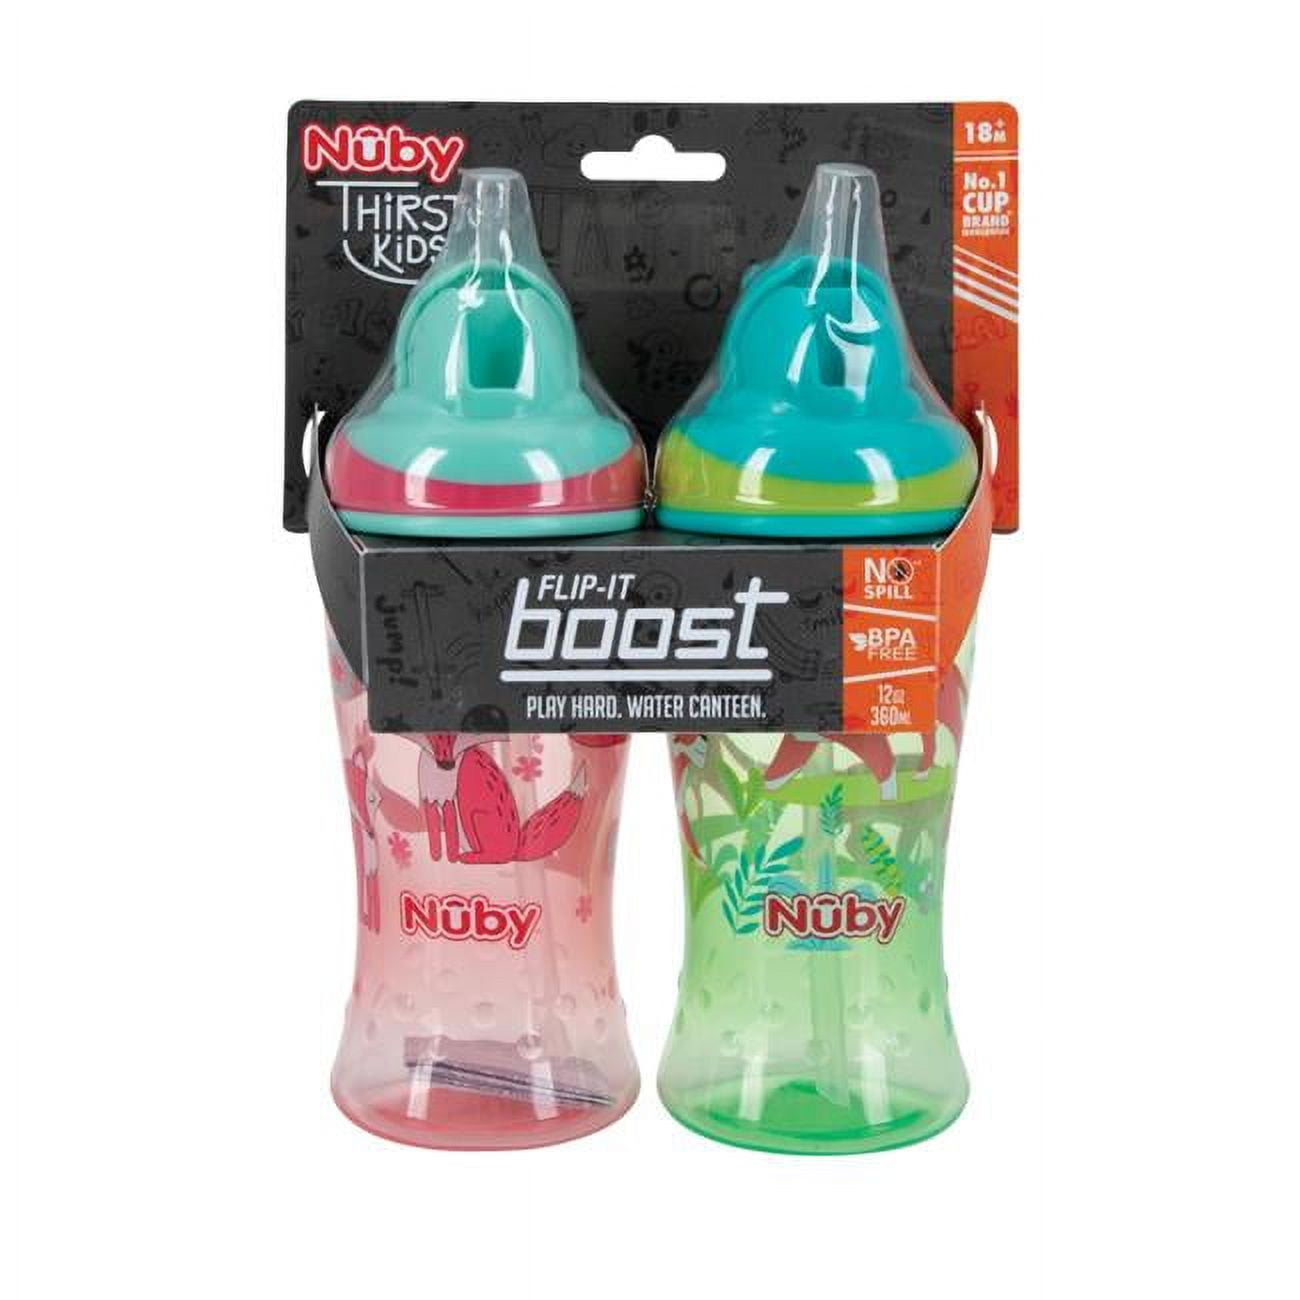 2367753 12 oz Nuby No-Spill Boost Cups with Flip-it Straw for 18 Plus Months - 2 per Pack - Case of 24